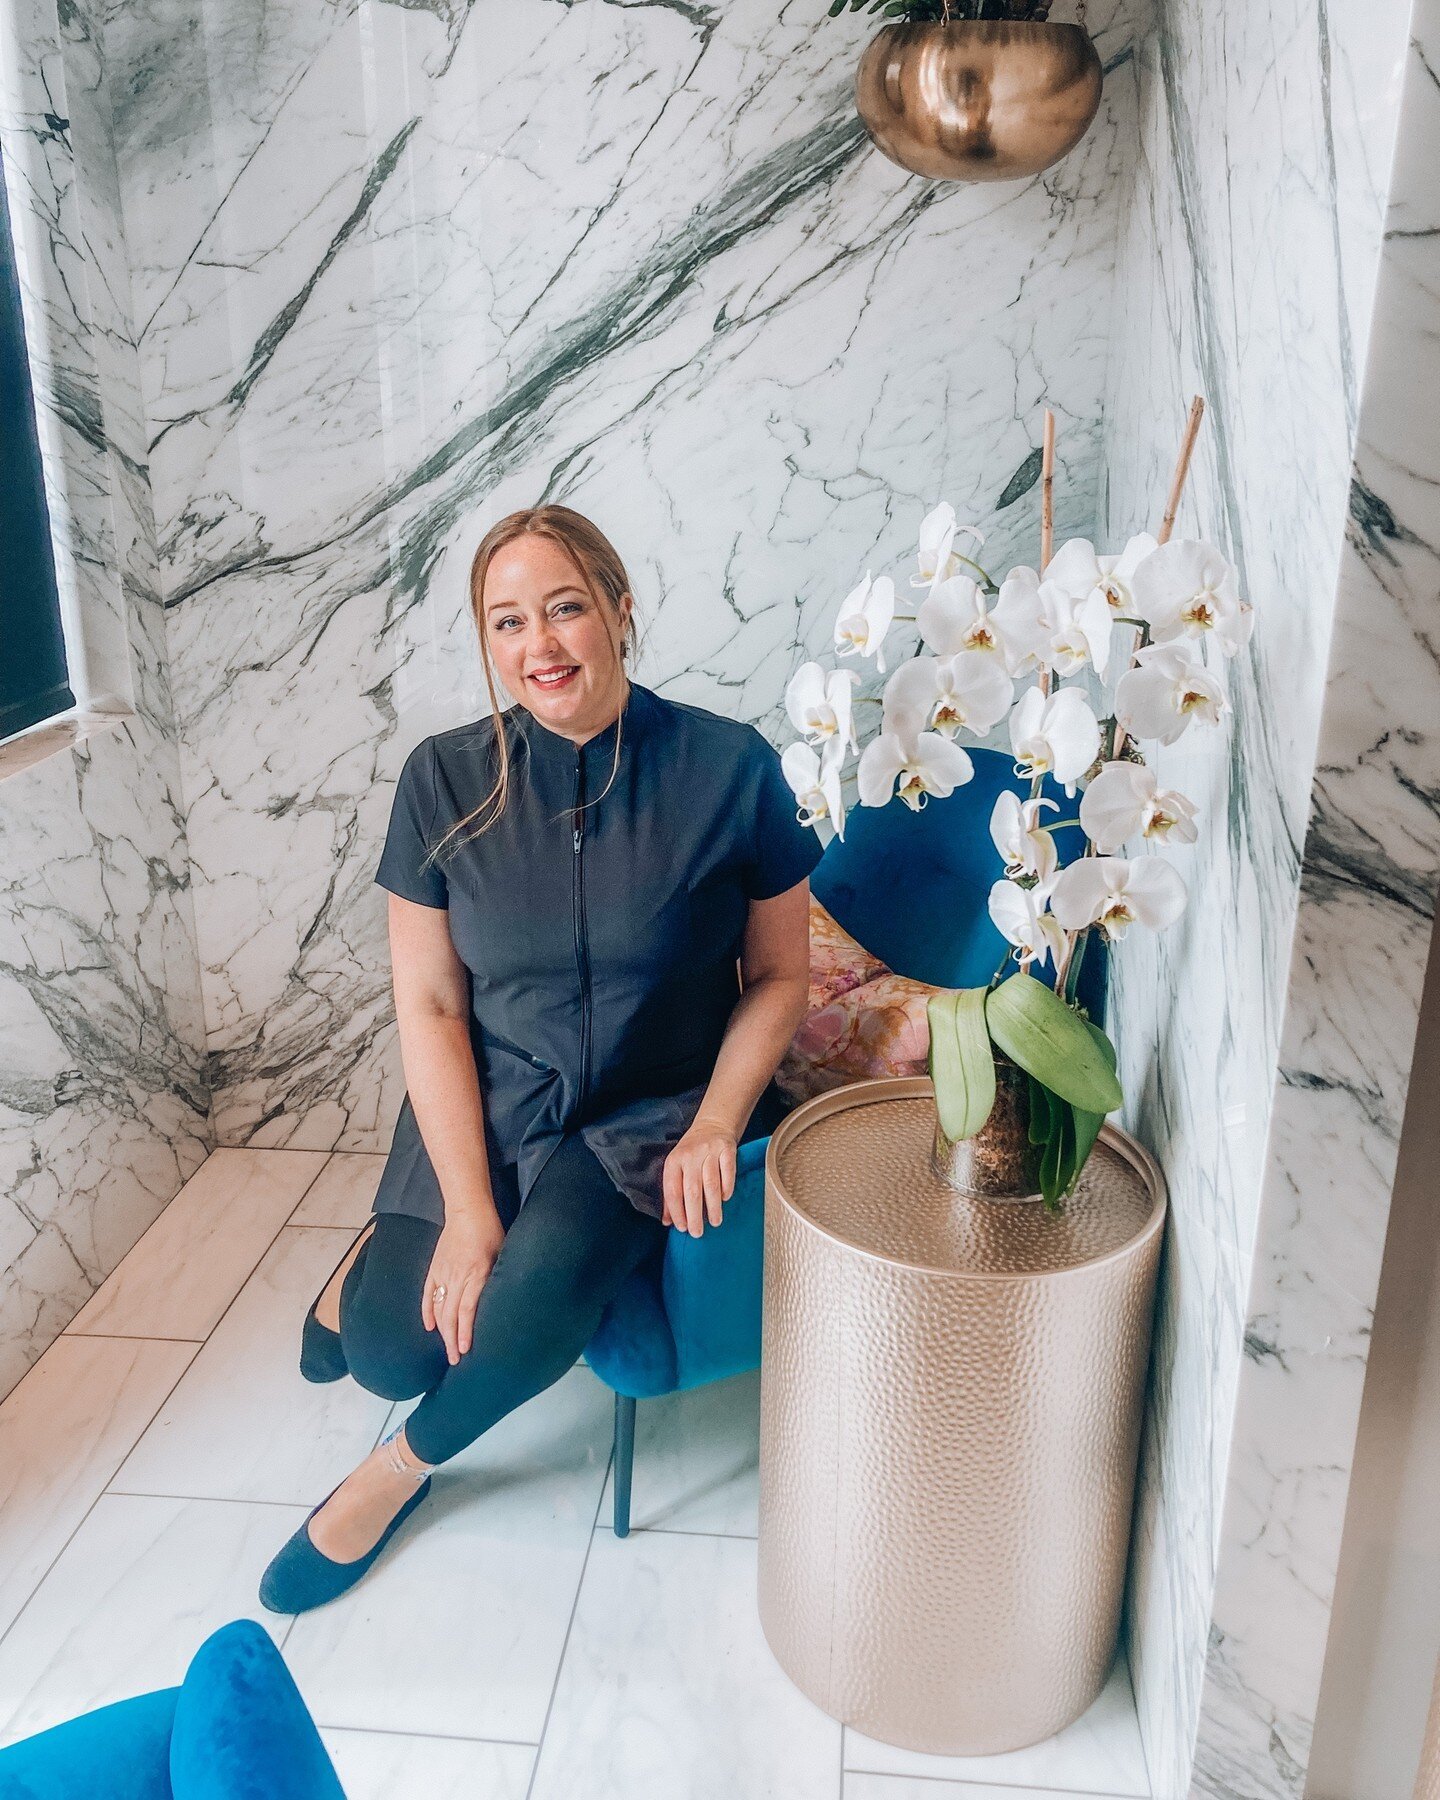 Please join us in welcoming Paris Seekatz Hayner, Licensed Aesthetician!⁣⁠
⁣⁠
Paris recently joined NeuroSpa Aspen, bringing almost two decades of experience and training in makeup, skincare, and her specialty, lash extensions. ⁠
⁠
She provides clien